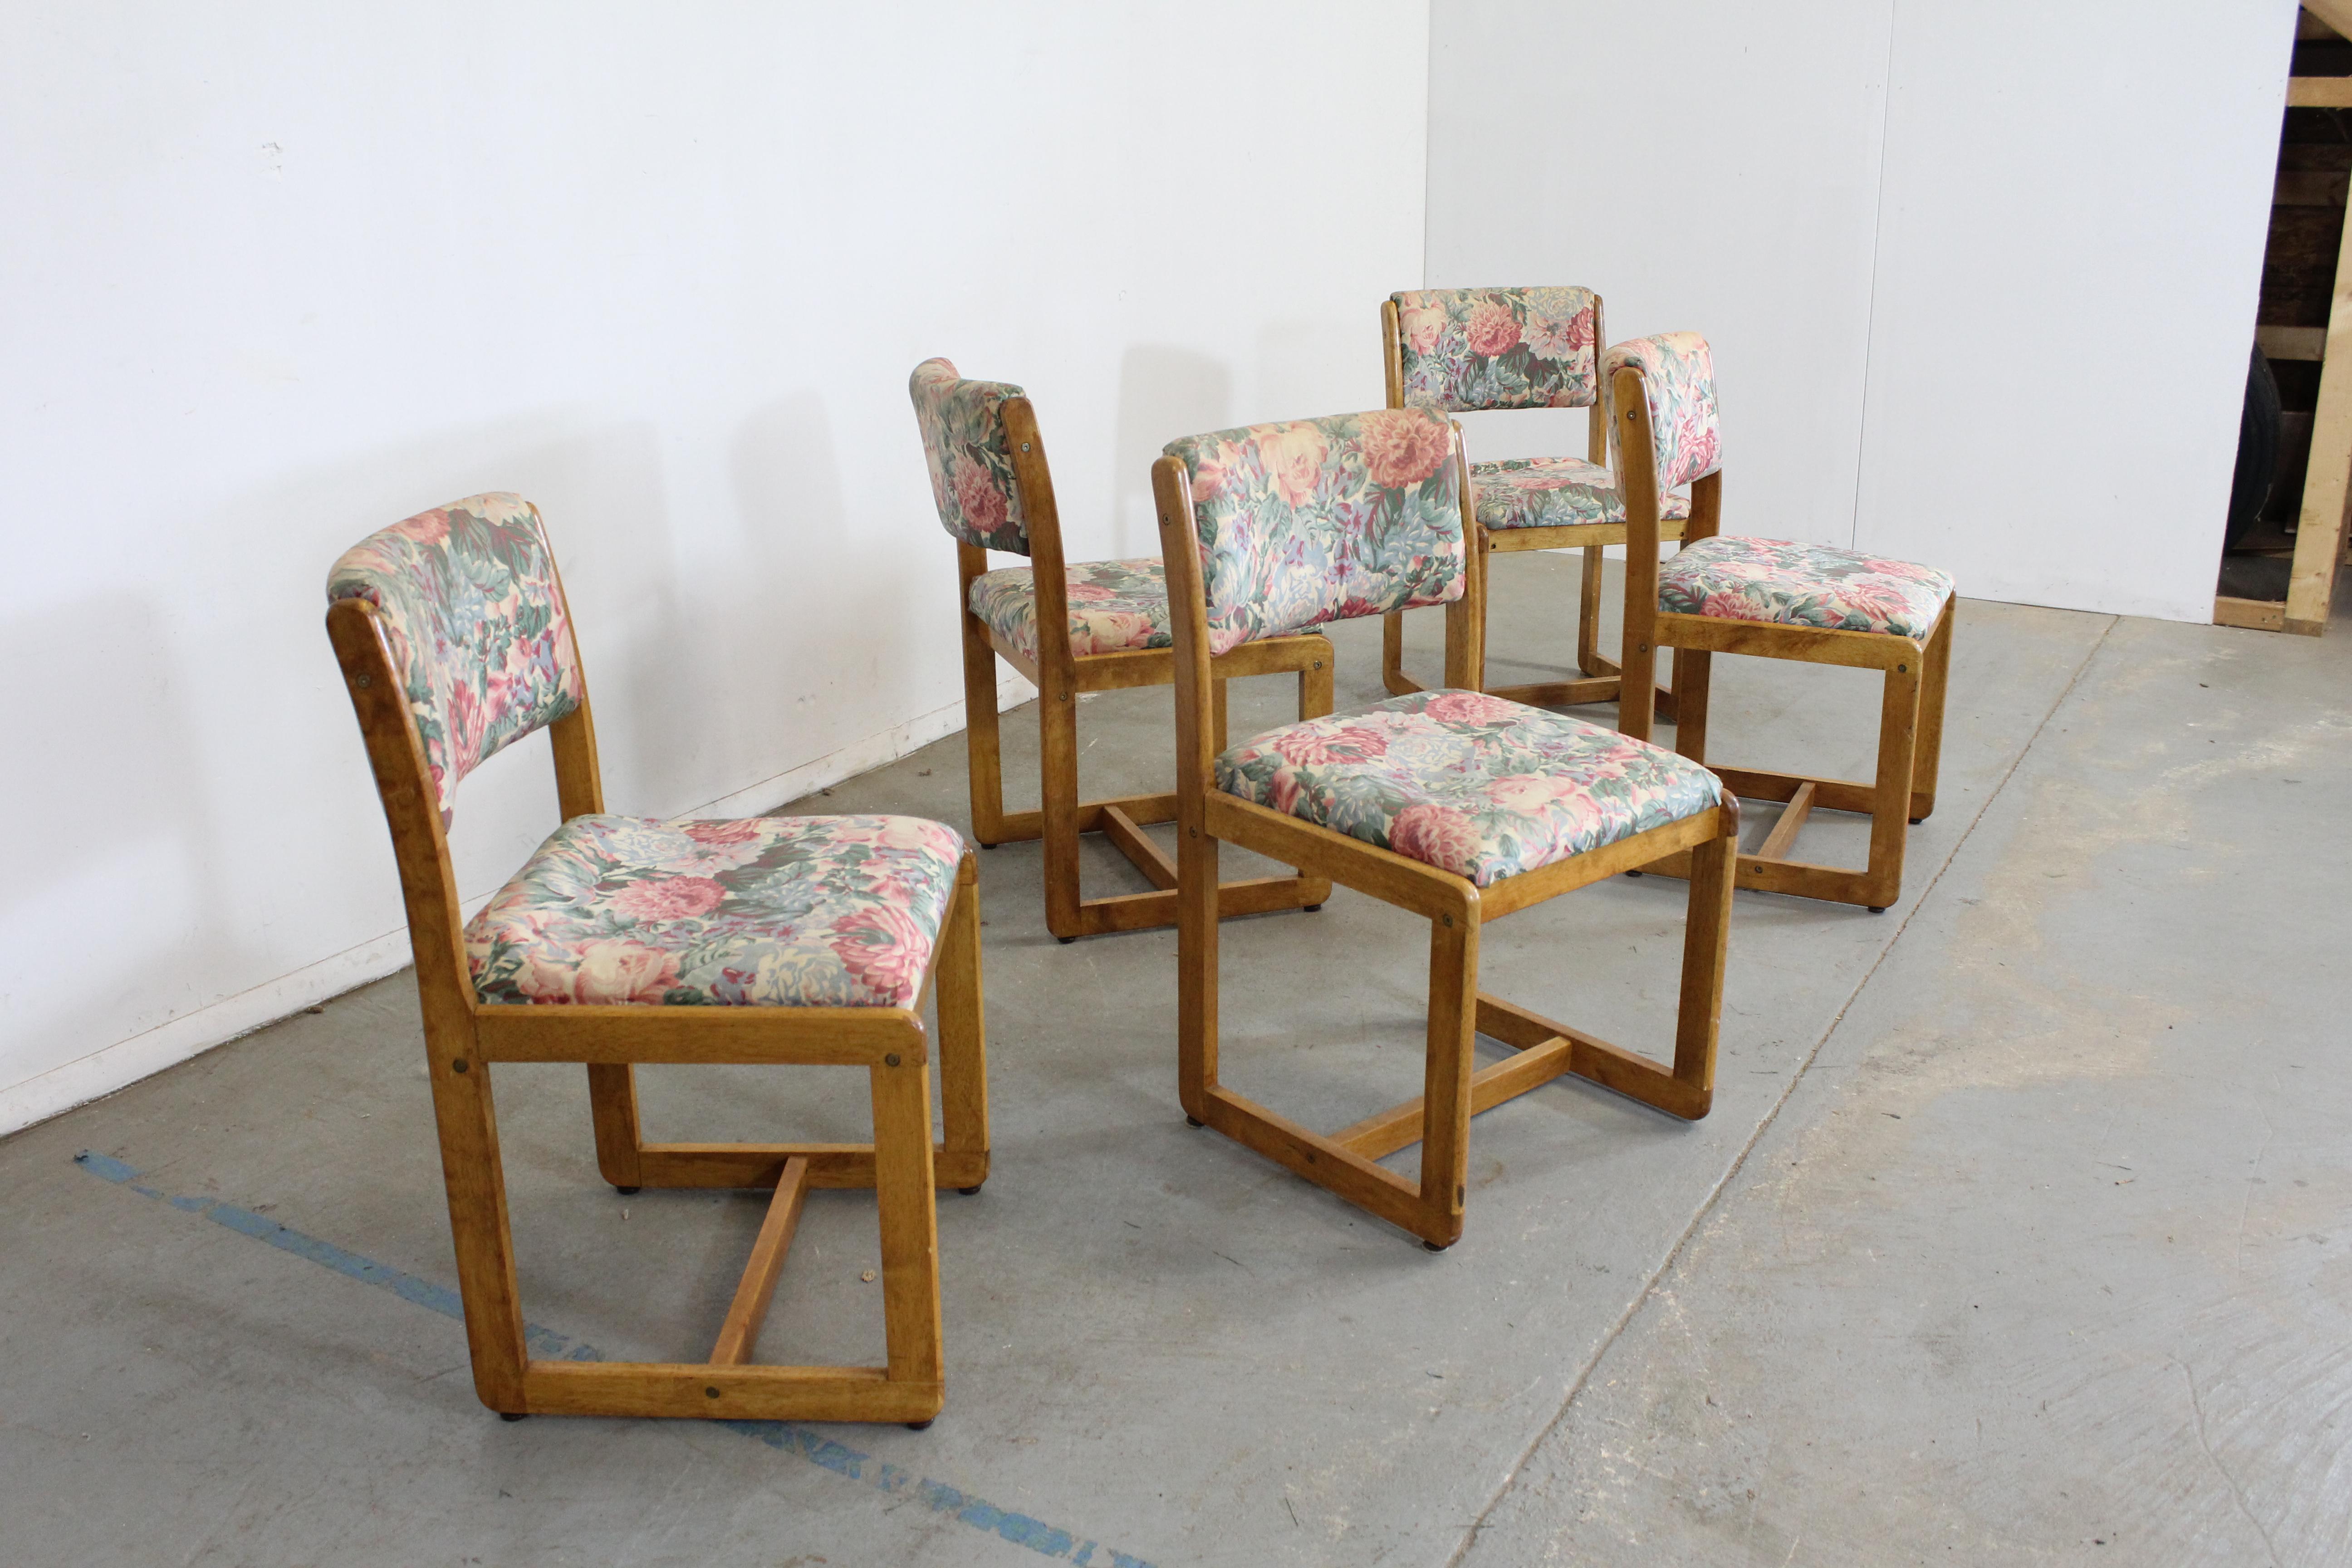 Set of 5 mid-century Danish modern teak side dining chairs 

Offered is a vintage set of 4 vintage Danish modern teak side dining chairs with teak backs. They are in good structural condition but should be reupholstered. Shows surface scratches,